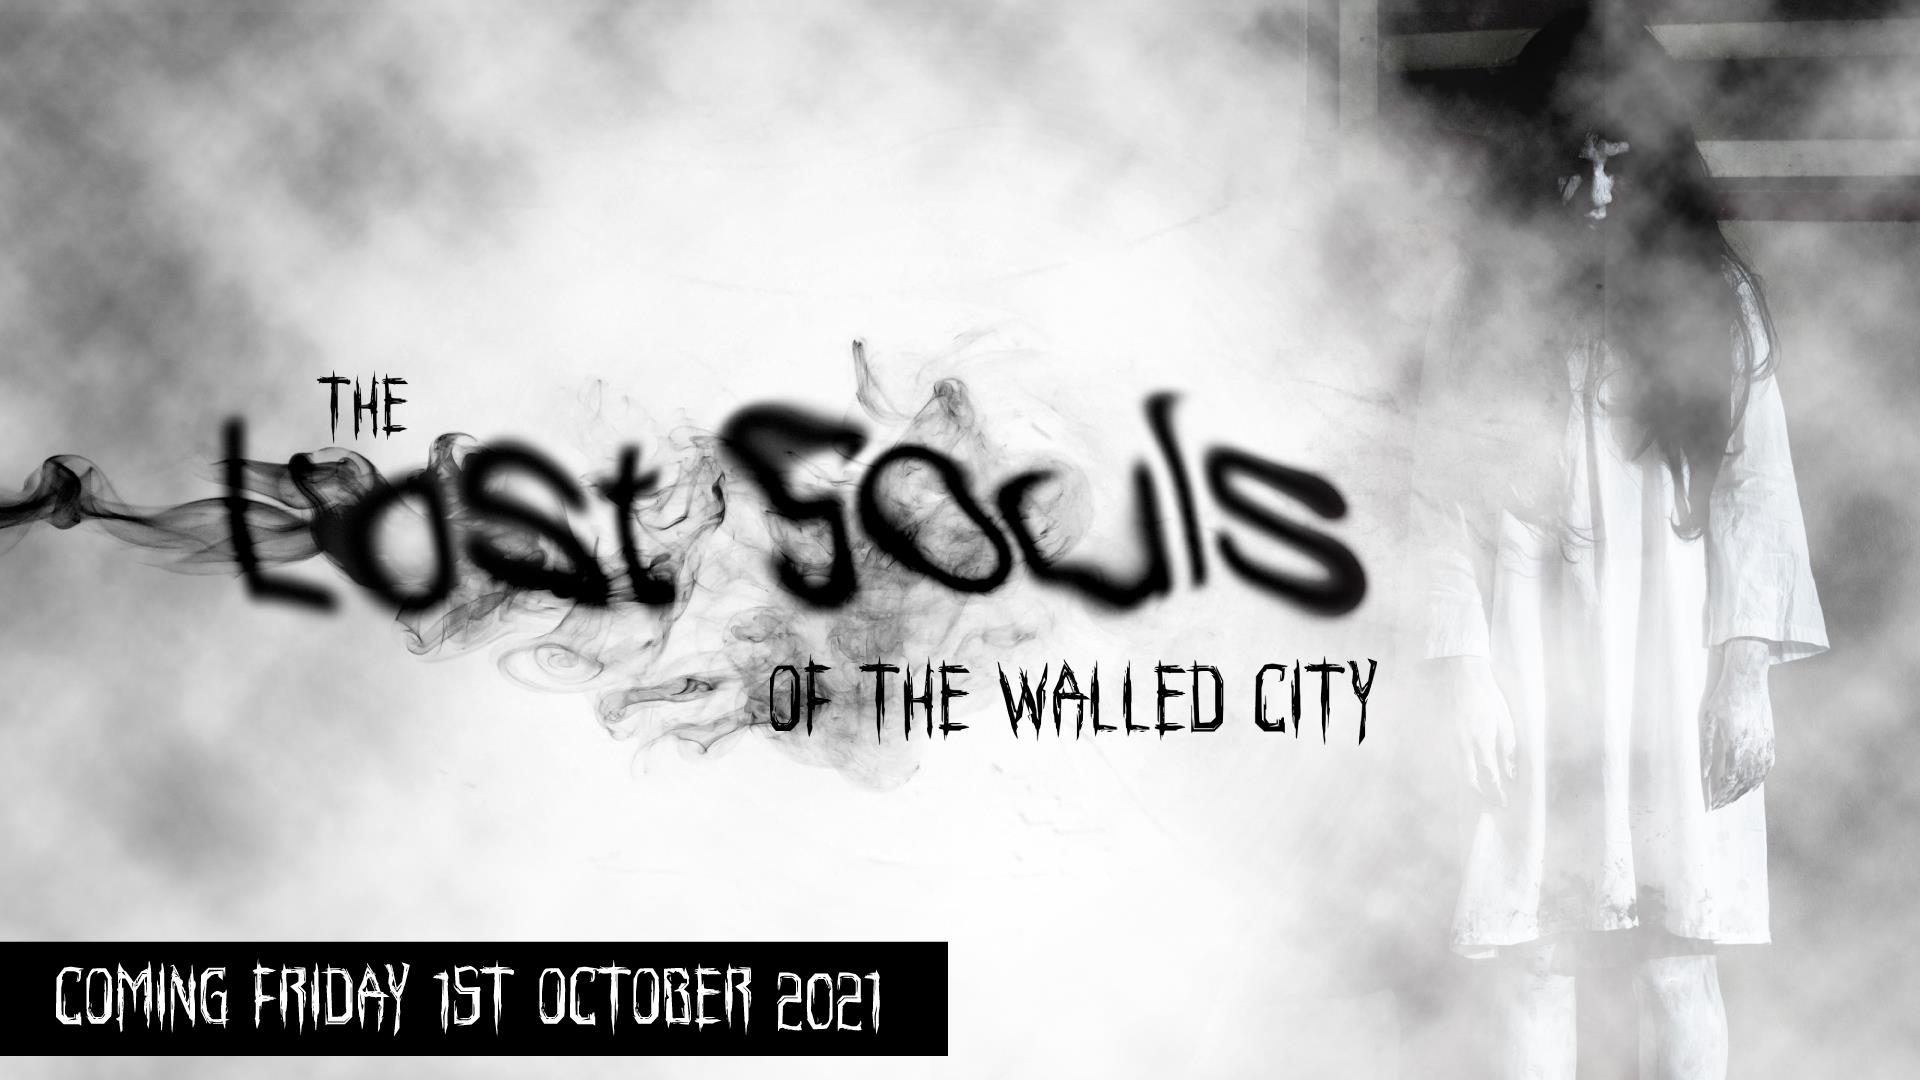 The Lost Souls of The Walled City